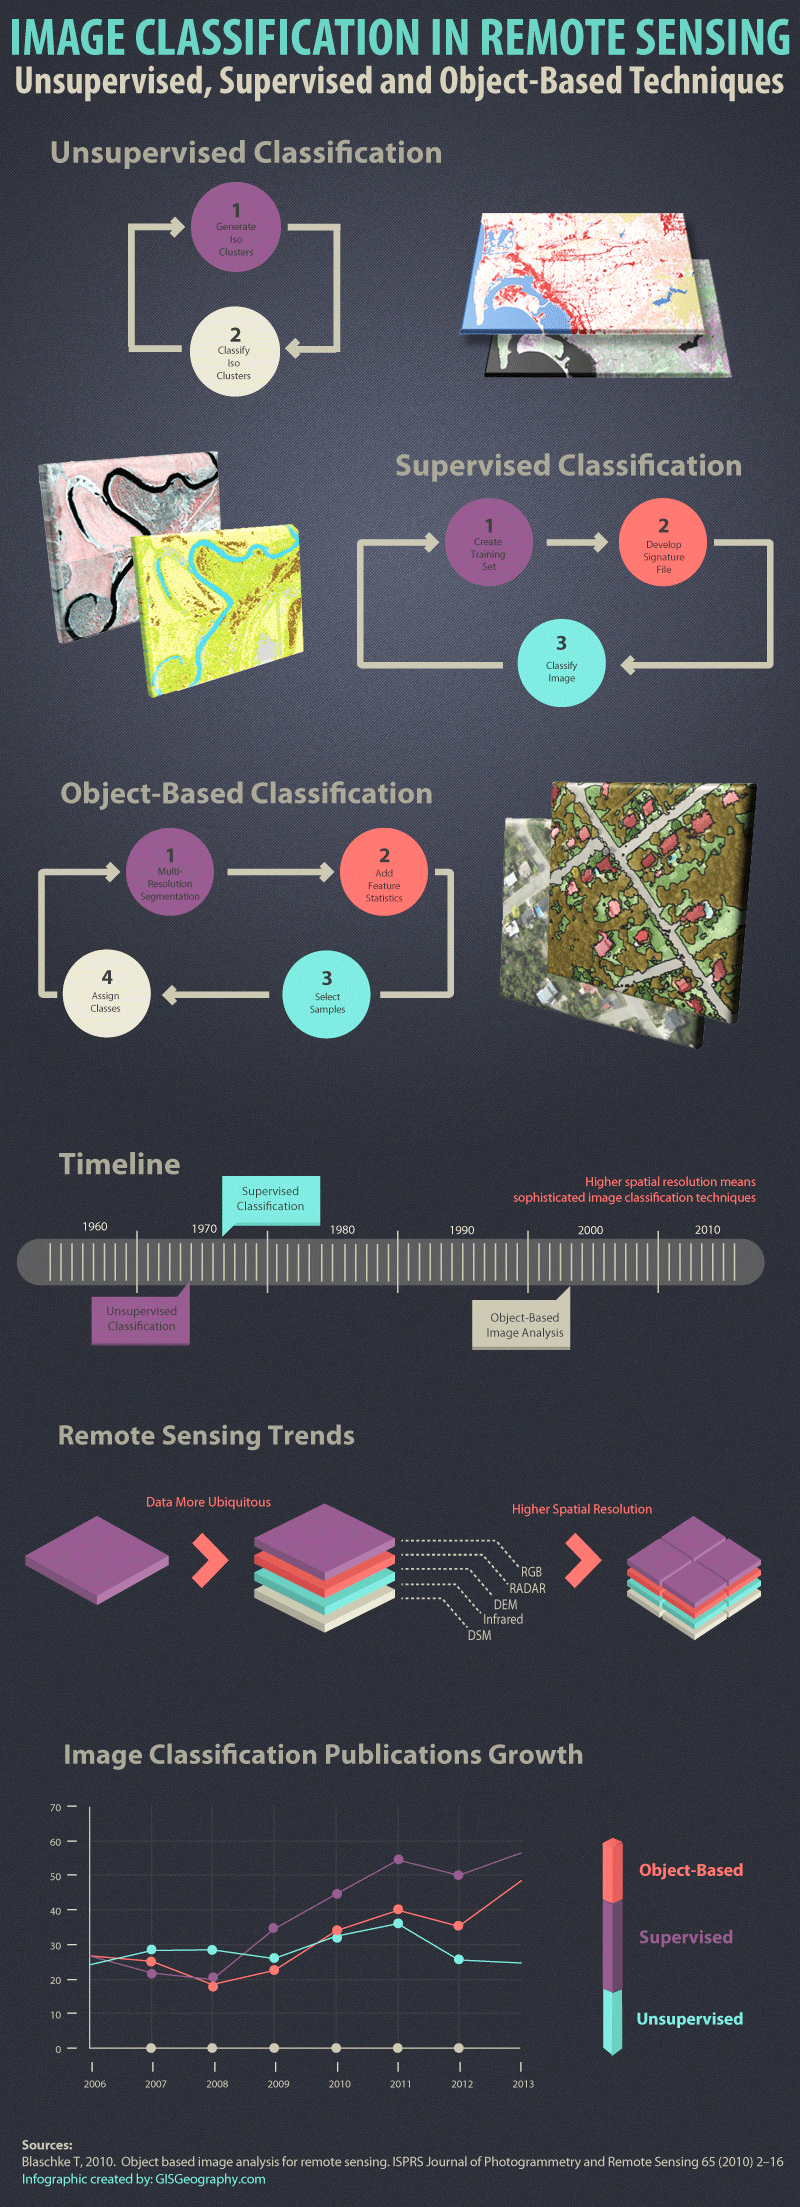 Image Classification in Remote Sensing